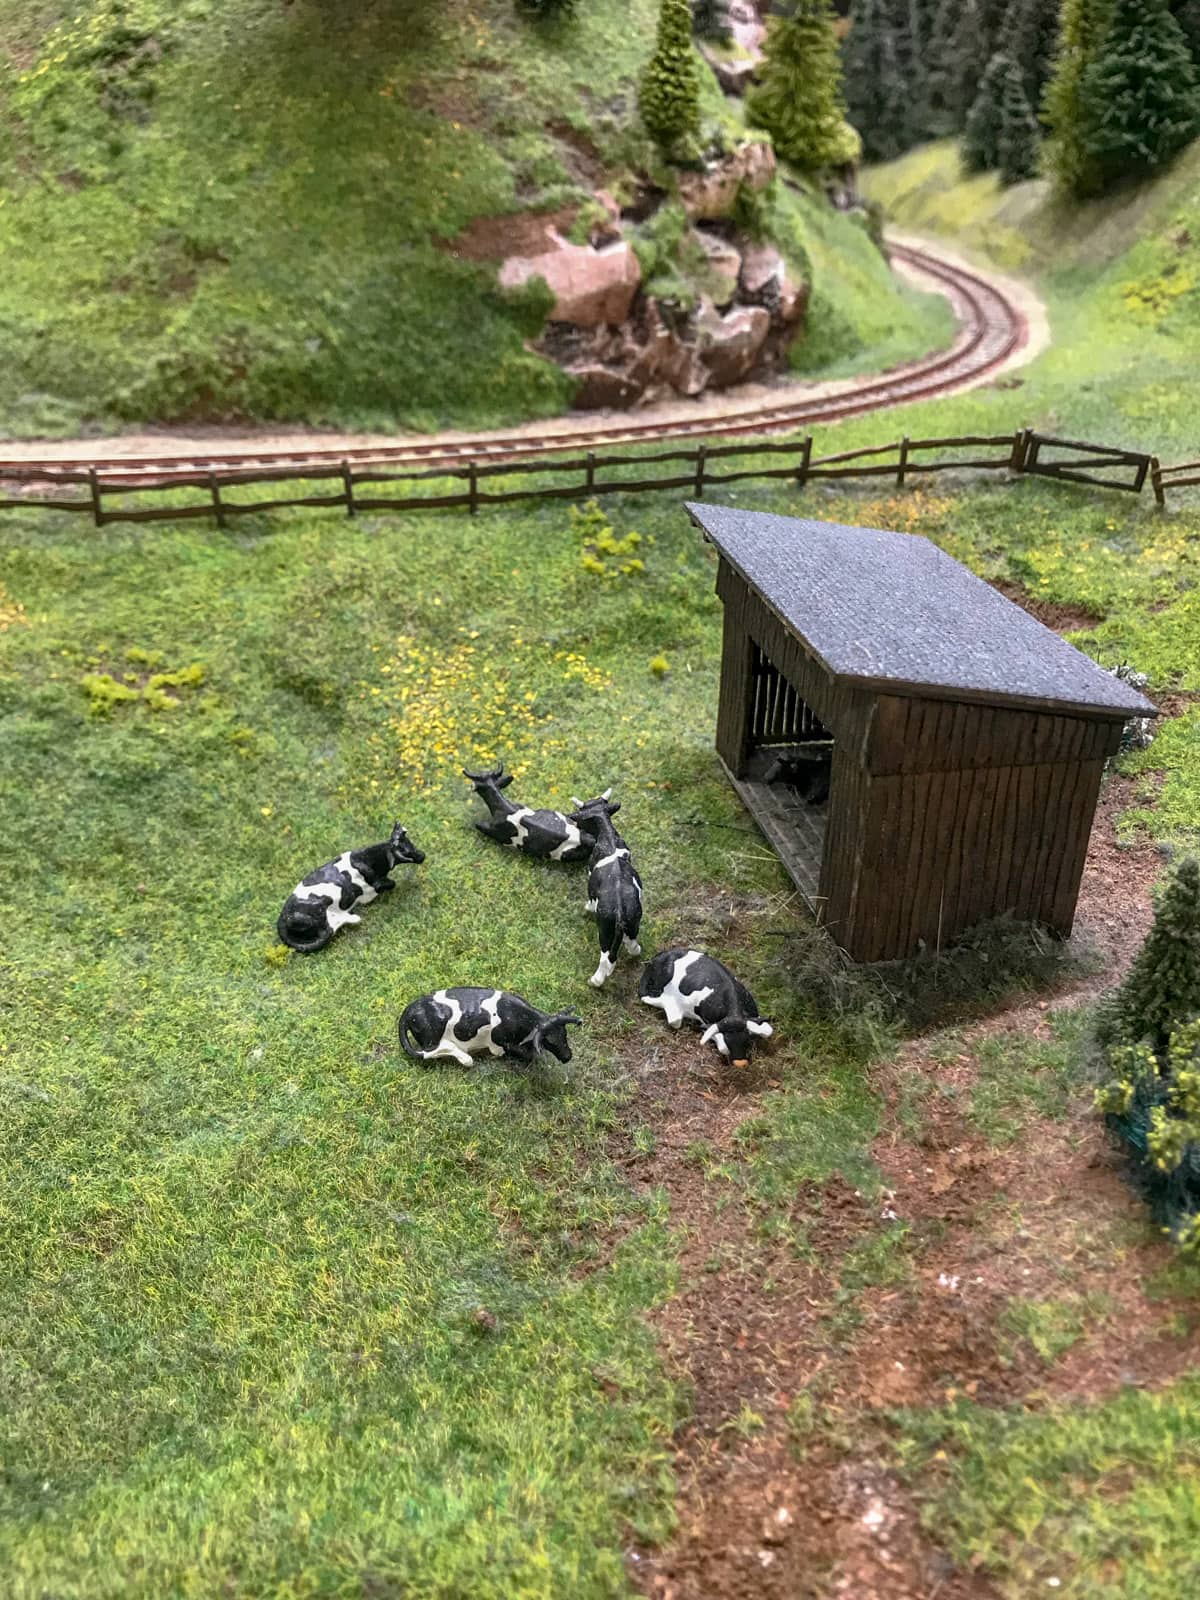 A close-up view of some black and white model cows on grass, part of a miniature model railway.